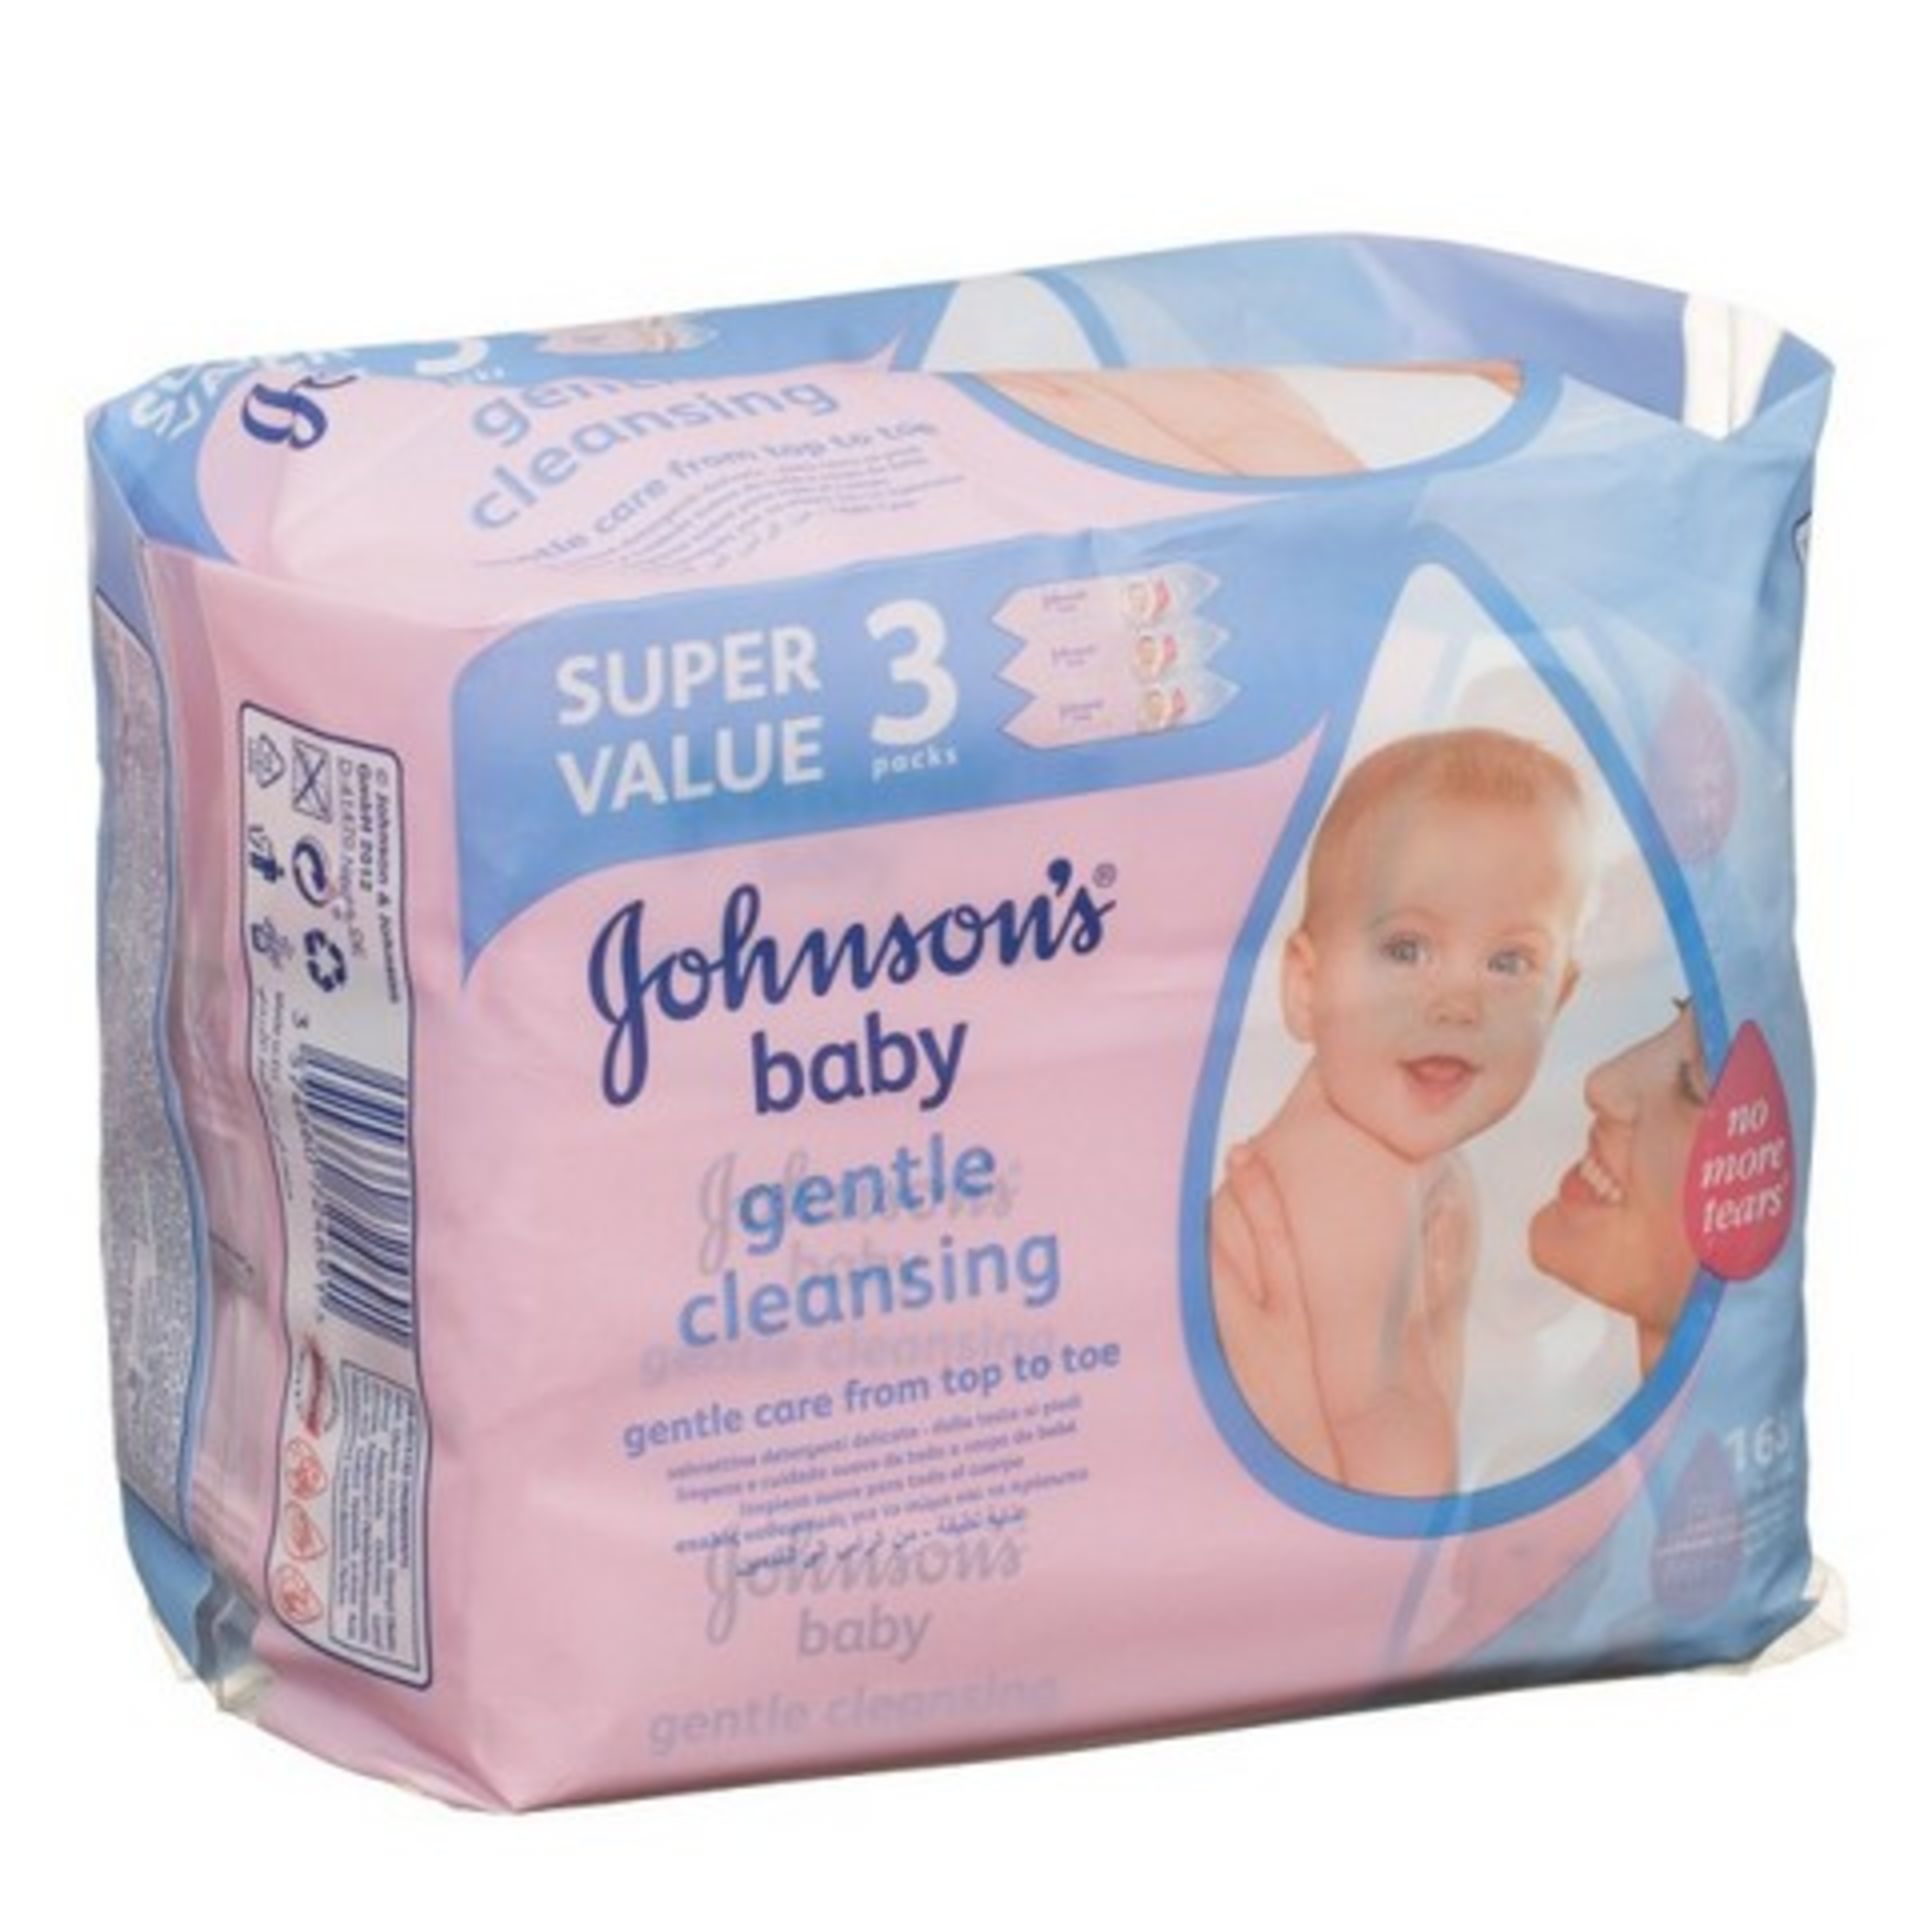 V Brand New One Triple Pack Of 168 Johnsons Baby Gentle Cleansing Wipes RRP 9.85 Use By Date Is 11/